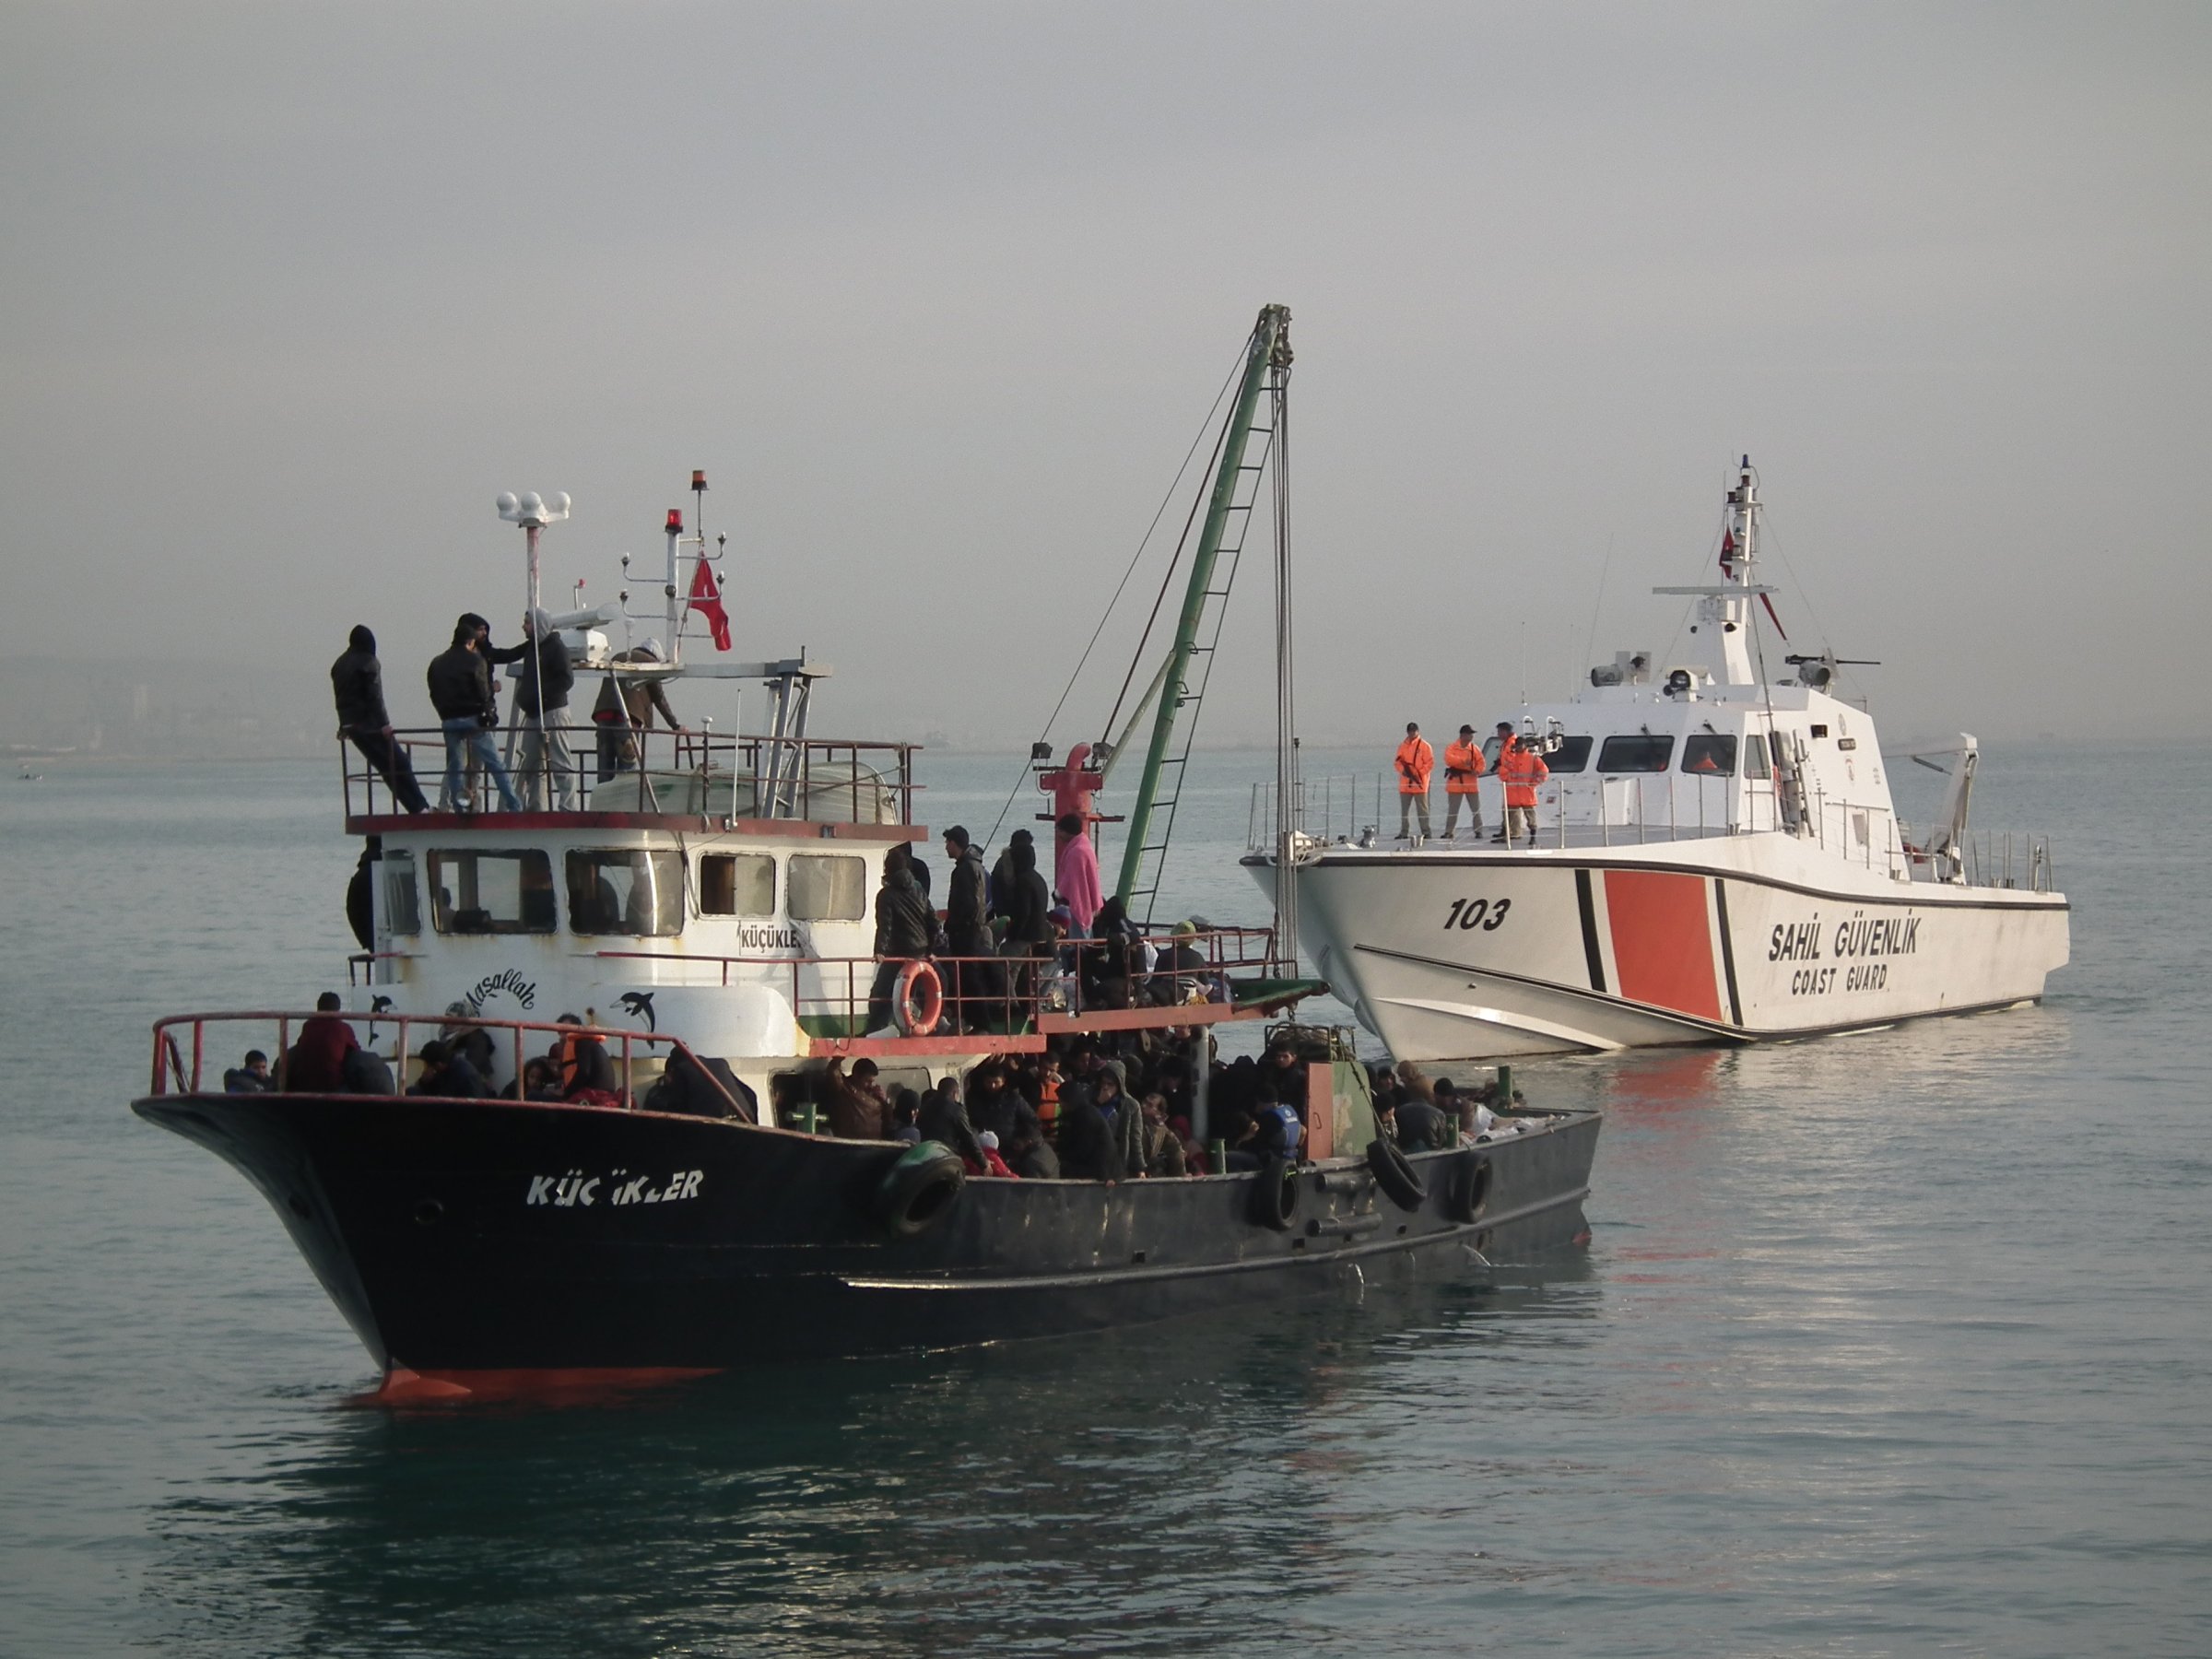 MERSIN, TURKEY - DECEMBER 06:  Illegal immigrants are escorted by the officers of Turkey's Coast Guard Mediterranean Region Command as they arrive in Mersin, Turkey on December 06, 2014. Some 361 illegal migrants and six organizers of the illegal crossing were captured while trying to illegally reach Europe on fishing boats. (Photo by Turkish Coast Guard Command/Anadolu Agency/Getty Images)